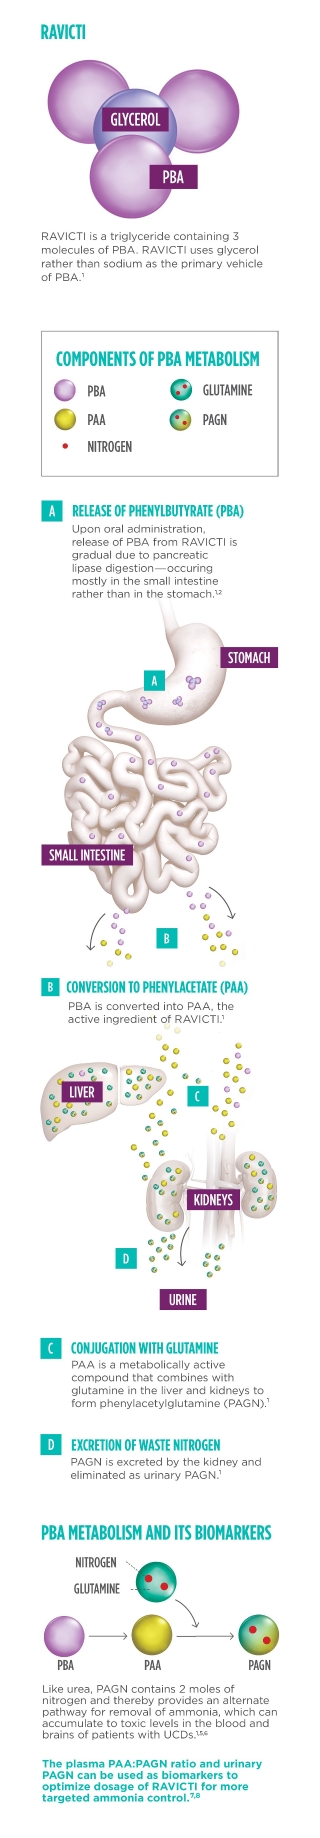 RAVICTI Mechanism of action and the role of phenylbutyrate (PBA) and phenylacetate (PAA)